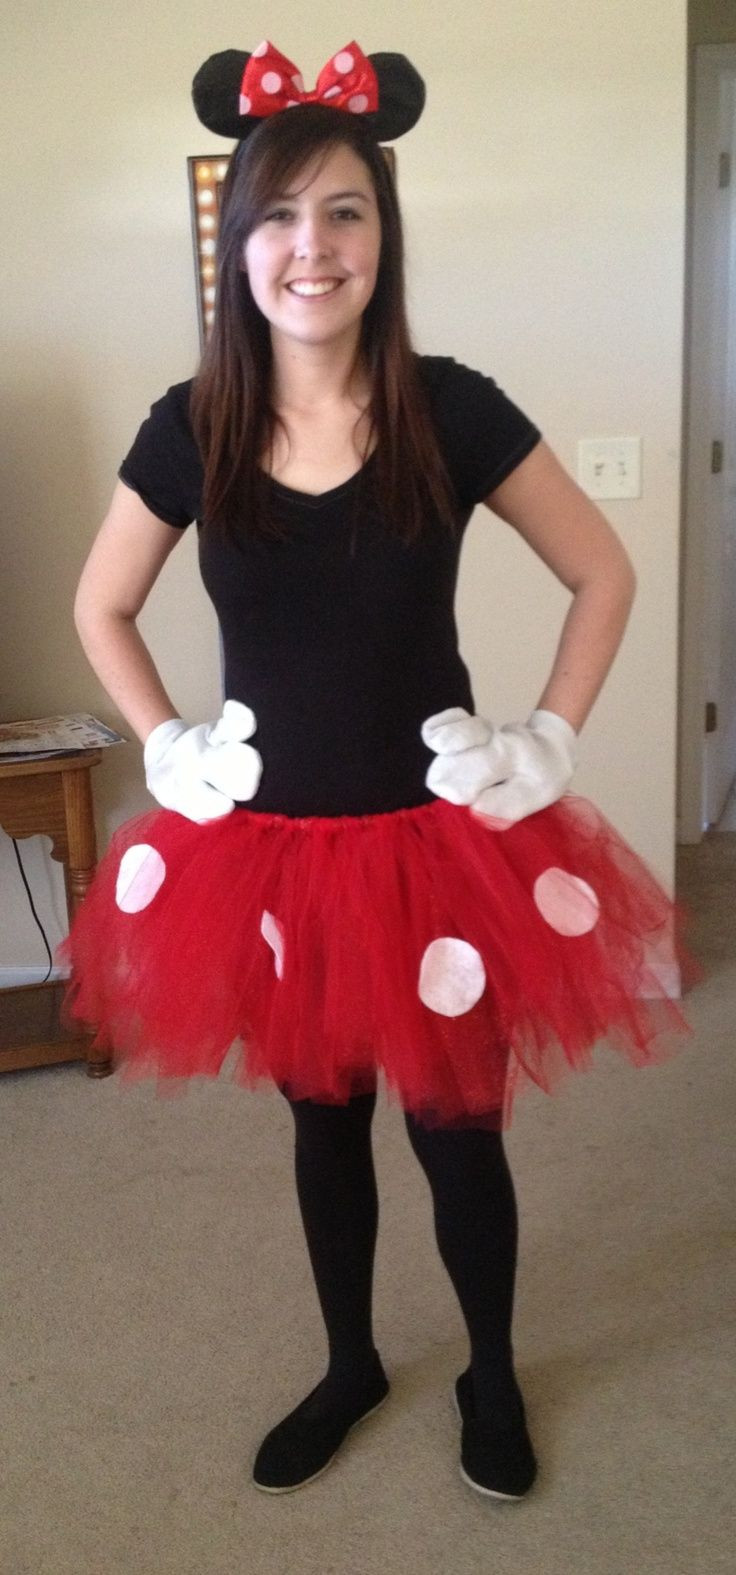 DIY Minnie Mouse Costume For Adults
 Best 25 Homemade minnie mouse costume ideas on Pinterest